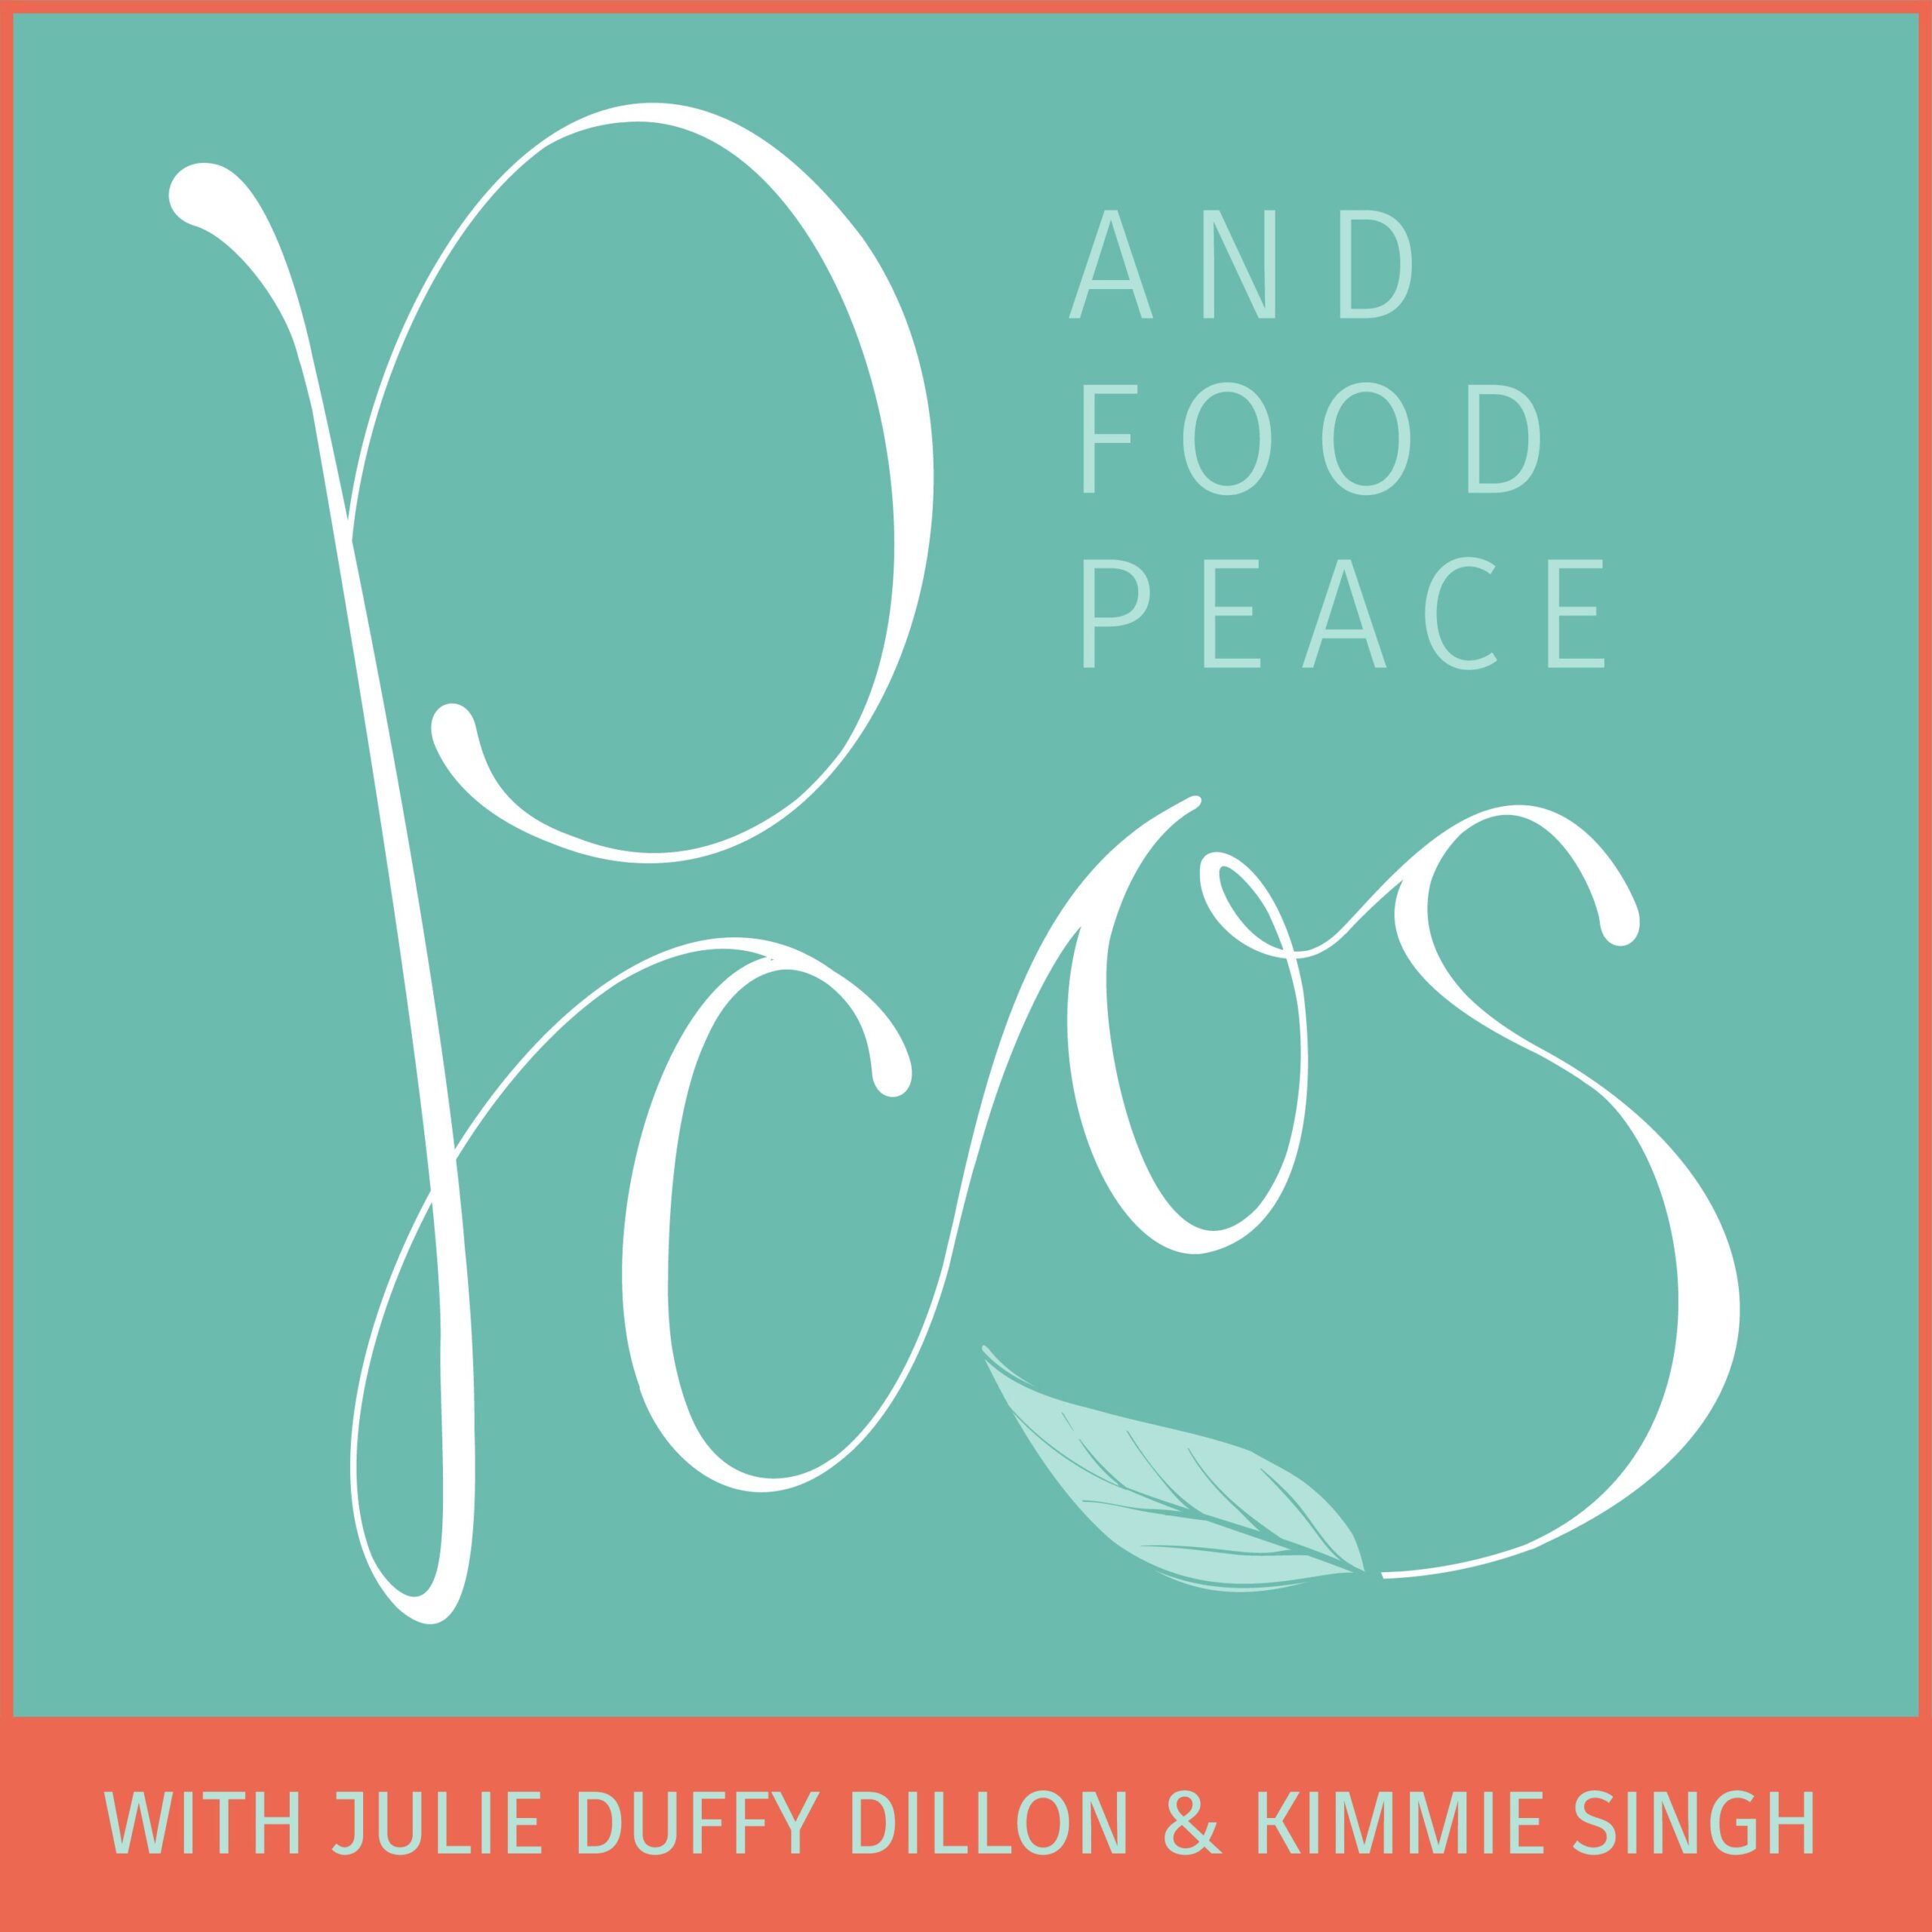 The PCOS and Food Peace Podcast is finally here!